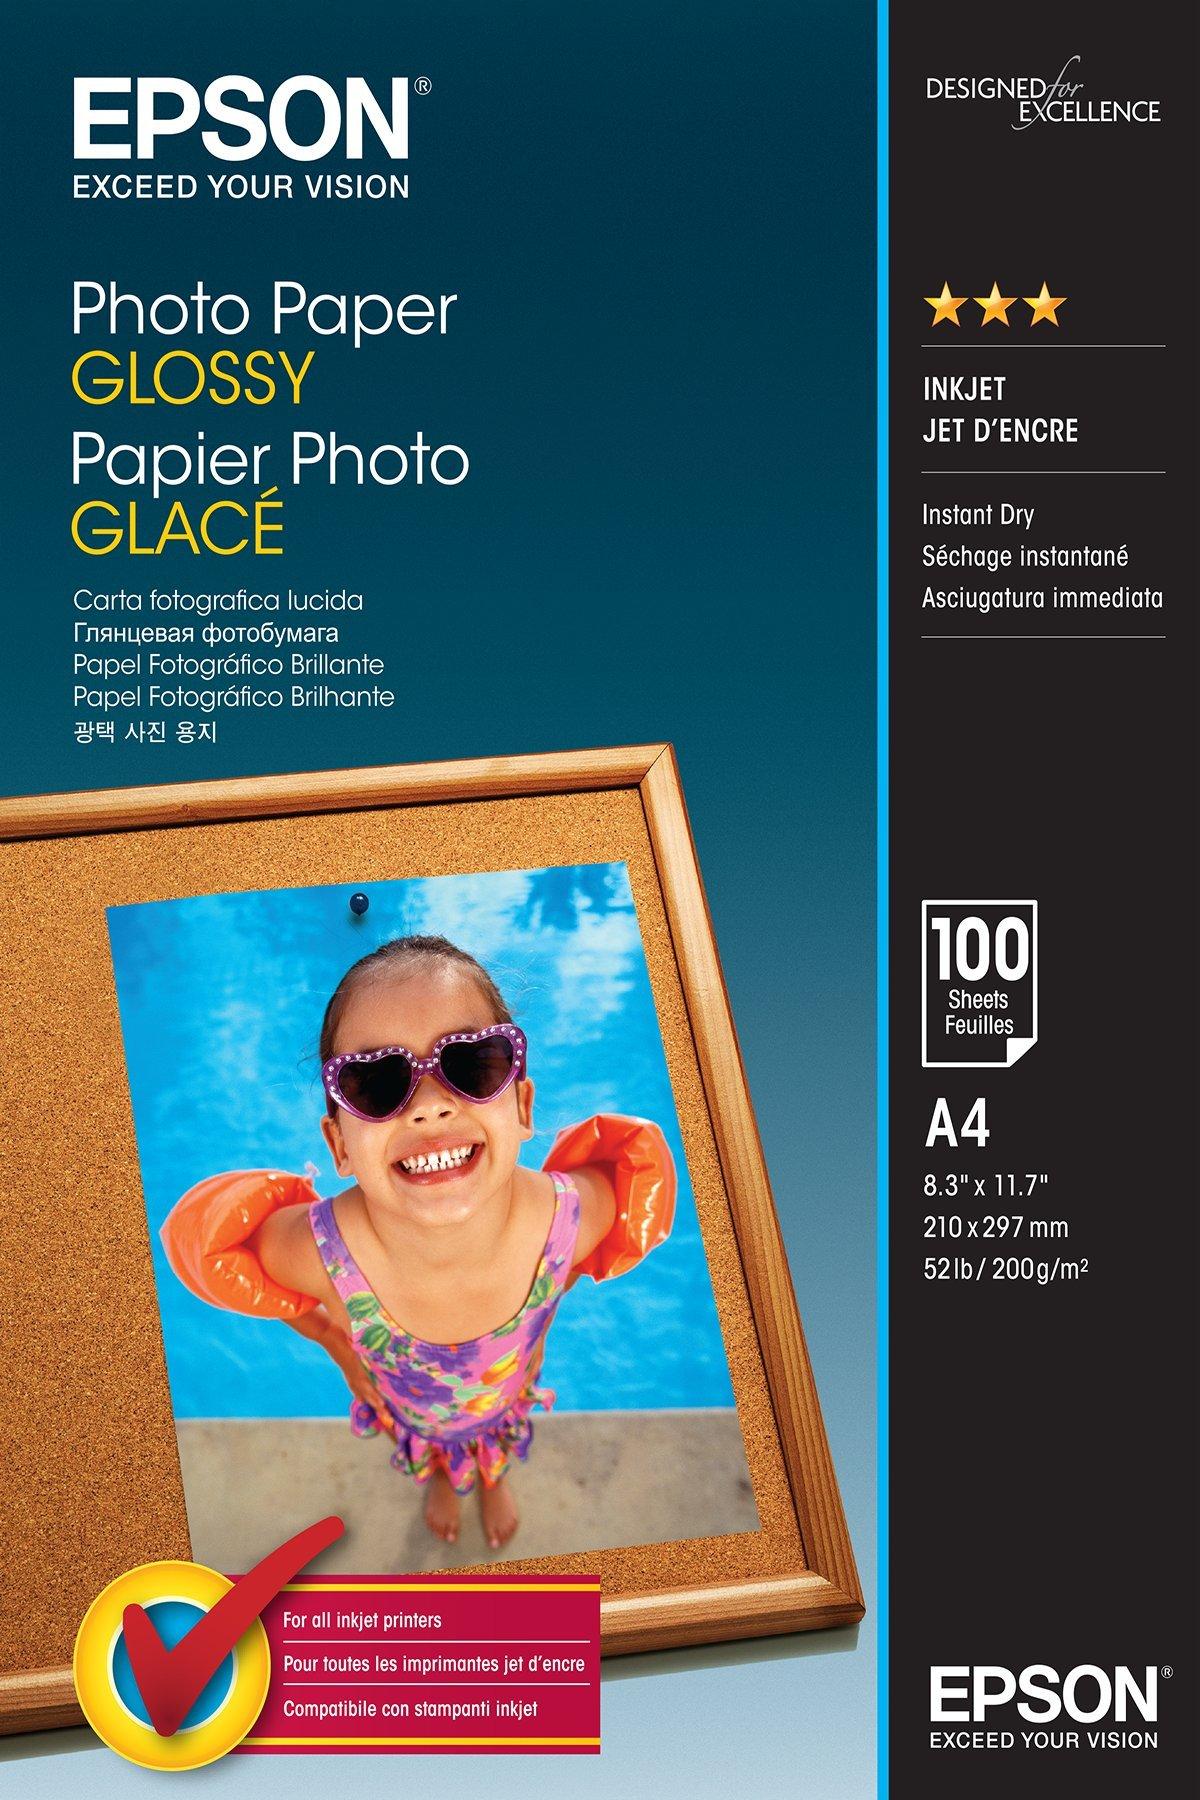 Met andere bands Wiegen Rodeo Photo Paper Glossy - A4 - 100 sheets | Paper and Media | Ink & Paper |  Products | Epson Europe